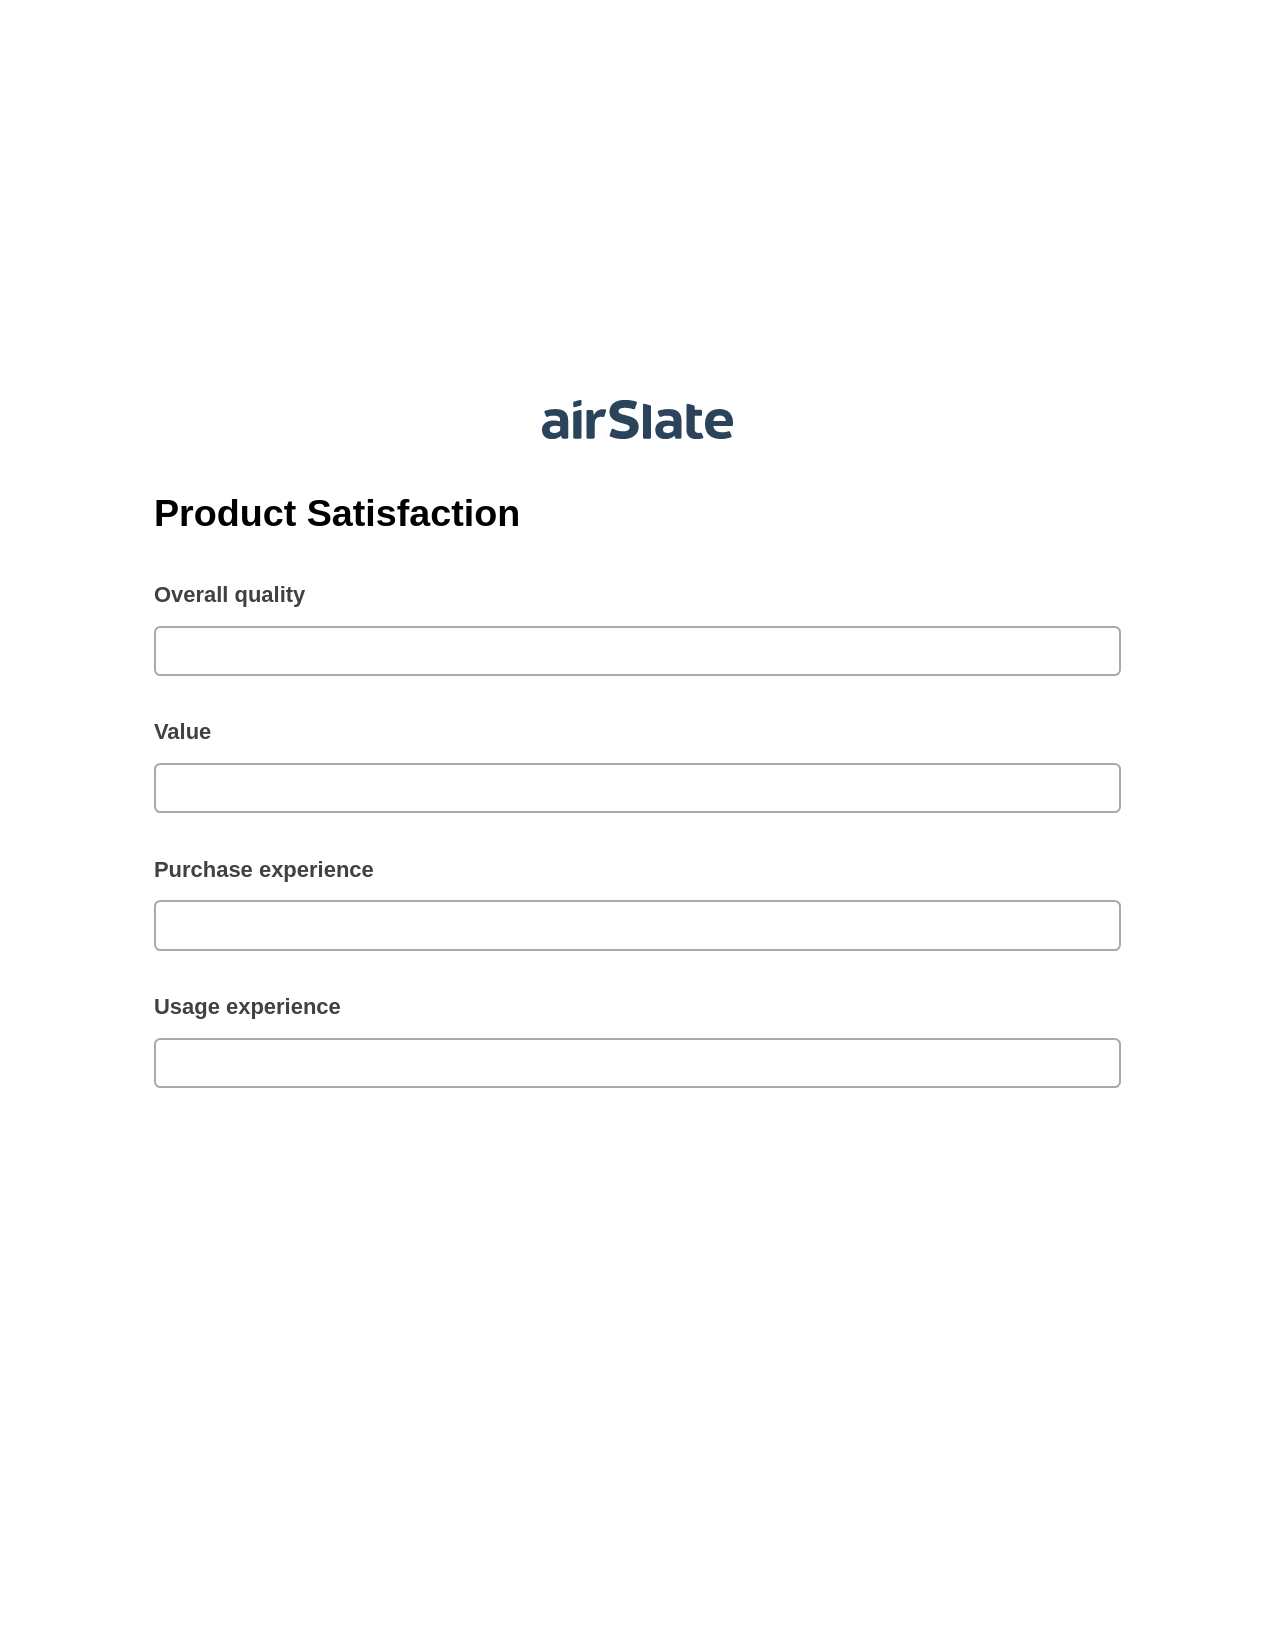 Product Satisfaction Pre-fill Dropdowns from Google Sheet Bot, Lock the slate bot, Export to NetSuite Record Bot